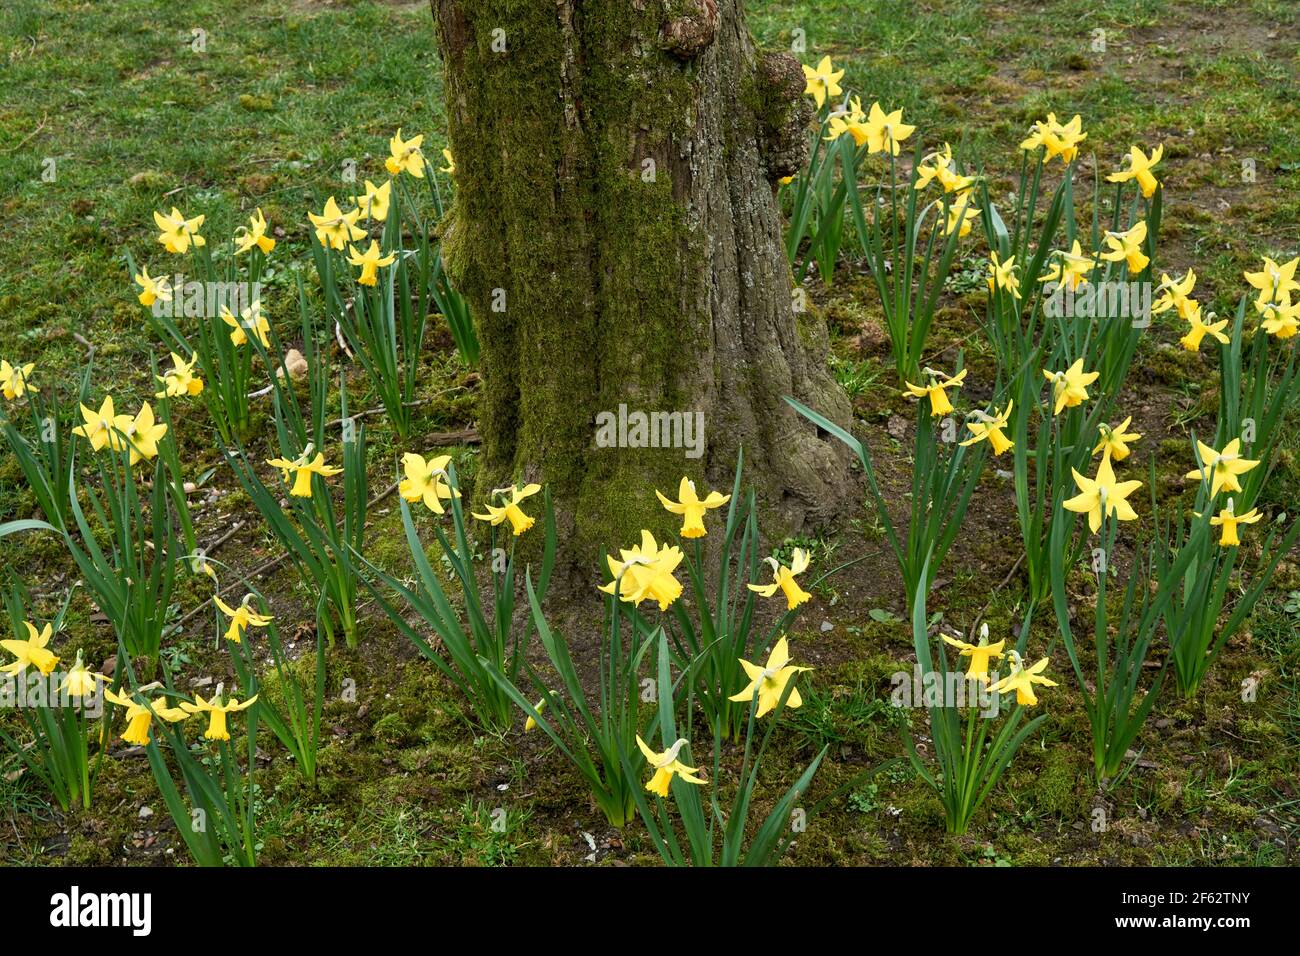 A ring of yellow daffodils surrounding a tree trunk in spring Stock Photo